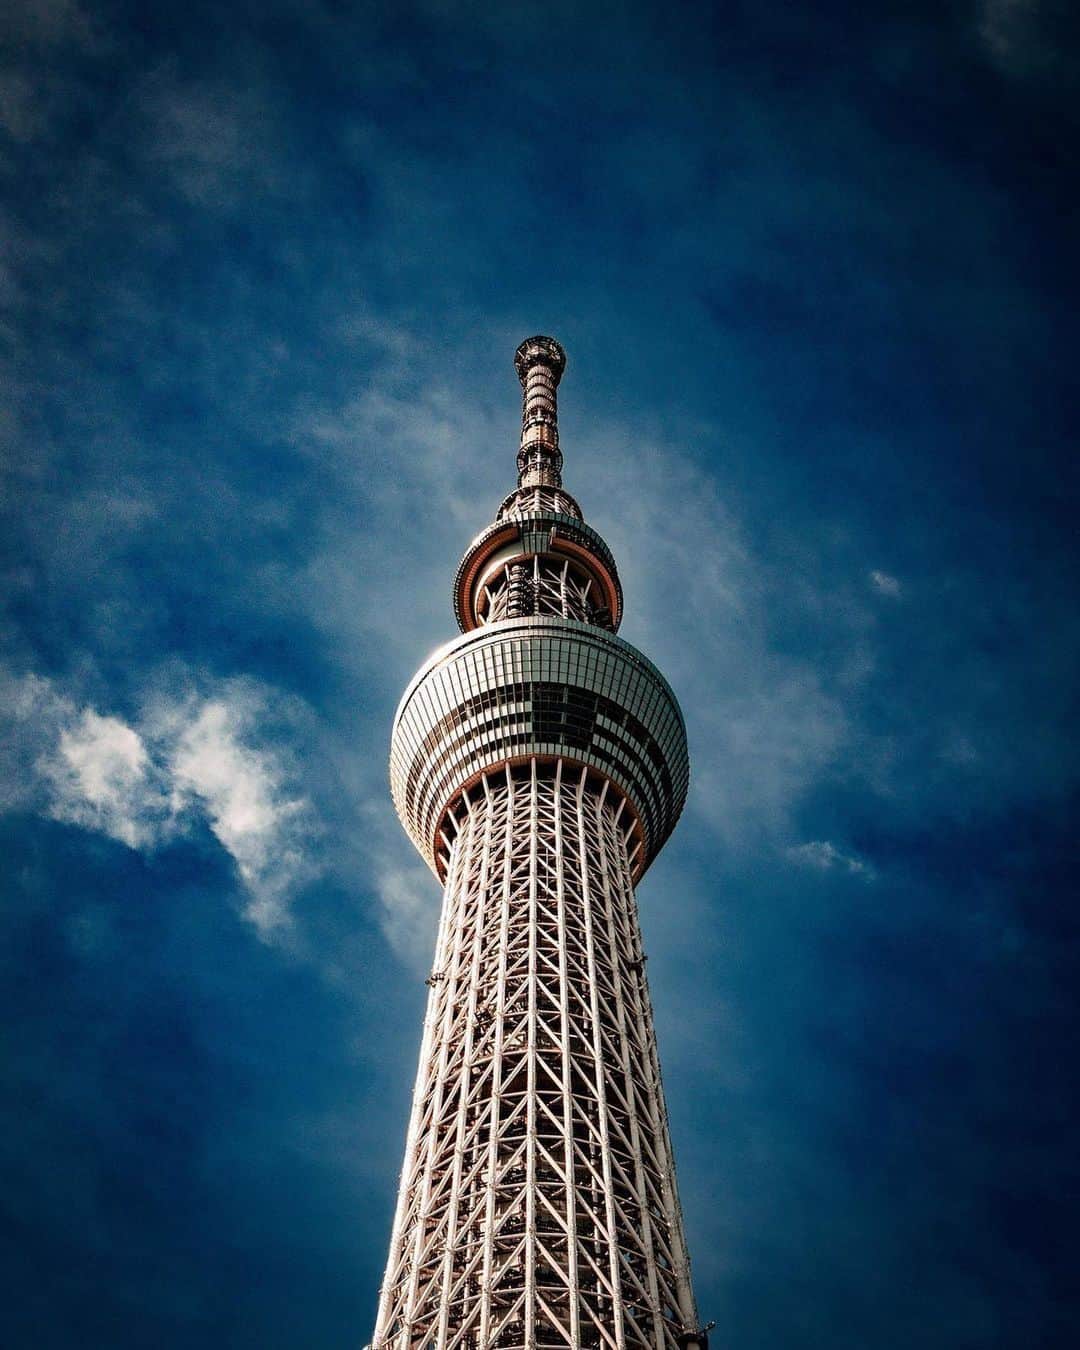 Promoting Tokyo Culture都庁文化振興部のインスタグラム：「Have you ever visited Tokyo Skytree's observation deck? The stunning view over not only Tokyo but also the surrounding cities and mountains makes you feel as if you're above the clouds ☁️ Experience the overwhelming scale of the world's tallest tower while gazing at views that will leave you in awe!  -  空高く聳え立つ東京スカイツリー。その展望室を訪れてみたことはありますか？ 東京のみならず、周りの都市や山々までをも見渡す見事な眺望は、まるで雲の上にいるかのよう☁️ 眼下の景色と広い空を眺めながら、世界一高いタワーの圧倒的なスケール感を体感してみてください。  #tokyoartsandculture 📸: @archeeblanco  #tokyoskytree #skytree #東京スカイツリー #スカイツリー  #tokyotrip #tokyostreet #tokyophotography #tokyojapan  #tokyotokyo #culturetrip #explorejpn #japan_of_insta #japan_art_photography #japan_great_view #theculturetrip #japantrip #bestphoto_japan #thestreetphotographyhub  #nipponpic #japan_photo_now #tokyolife #discoverjapan #japanfocus #japanesestyle #unknownjapan #streetclassics #timeless_streets  #streetsnap #artphoto」